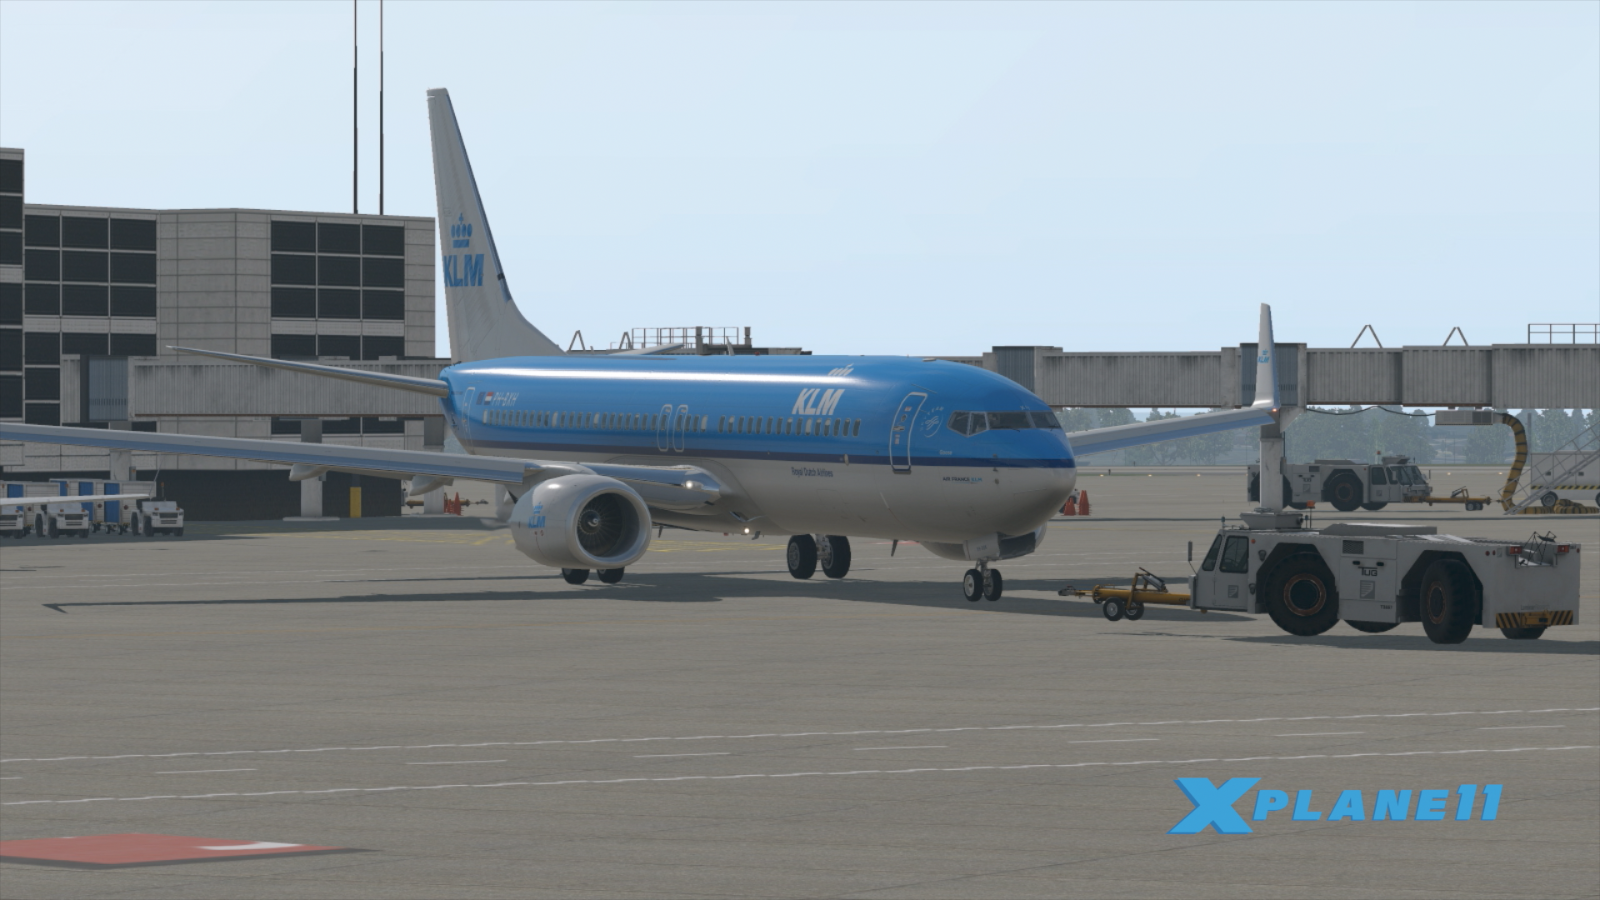 X Plane 11 Screenshots, Image And Picture